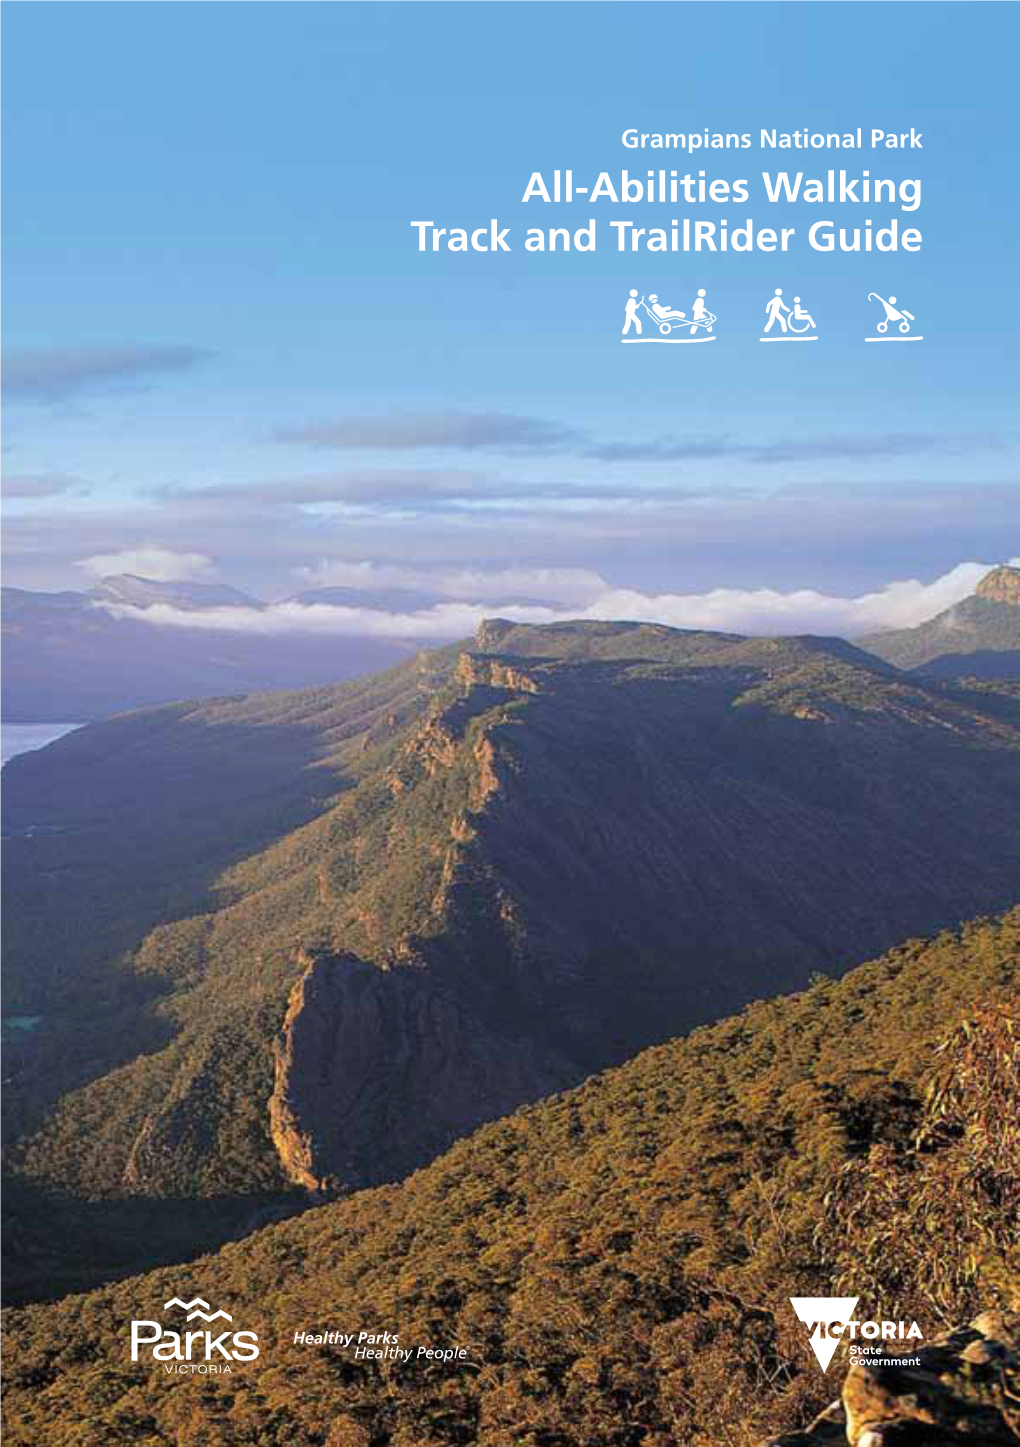 Grampians National Park All-Abilities Walking Track and Trailrider Guide Foreword & Acknowledgements